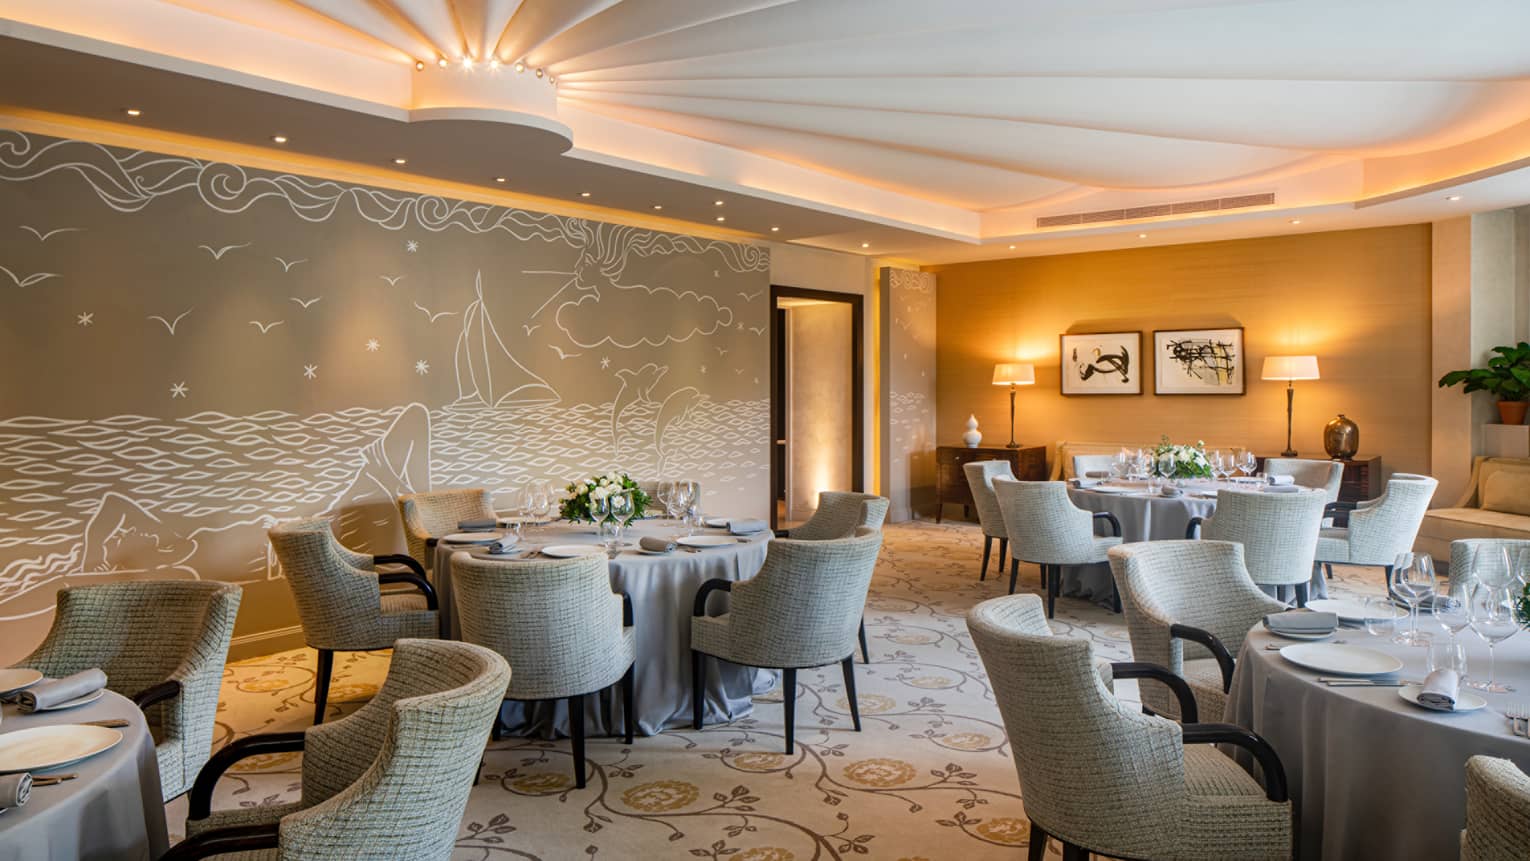 Le Cap restaurant, round set tables, beige rounded chairs, beige sea-themed wall mural, uplit ceiling